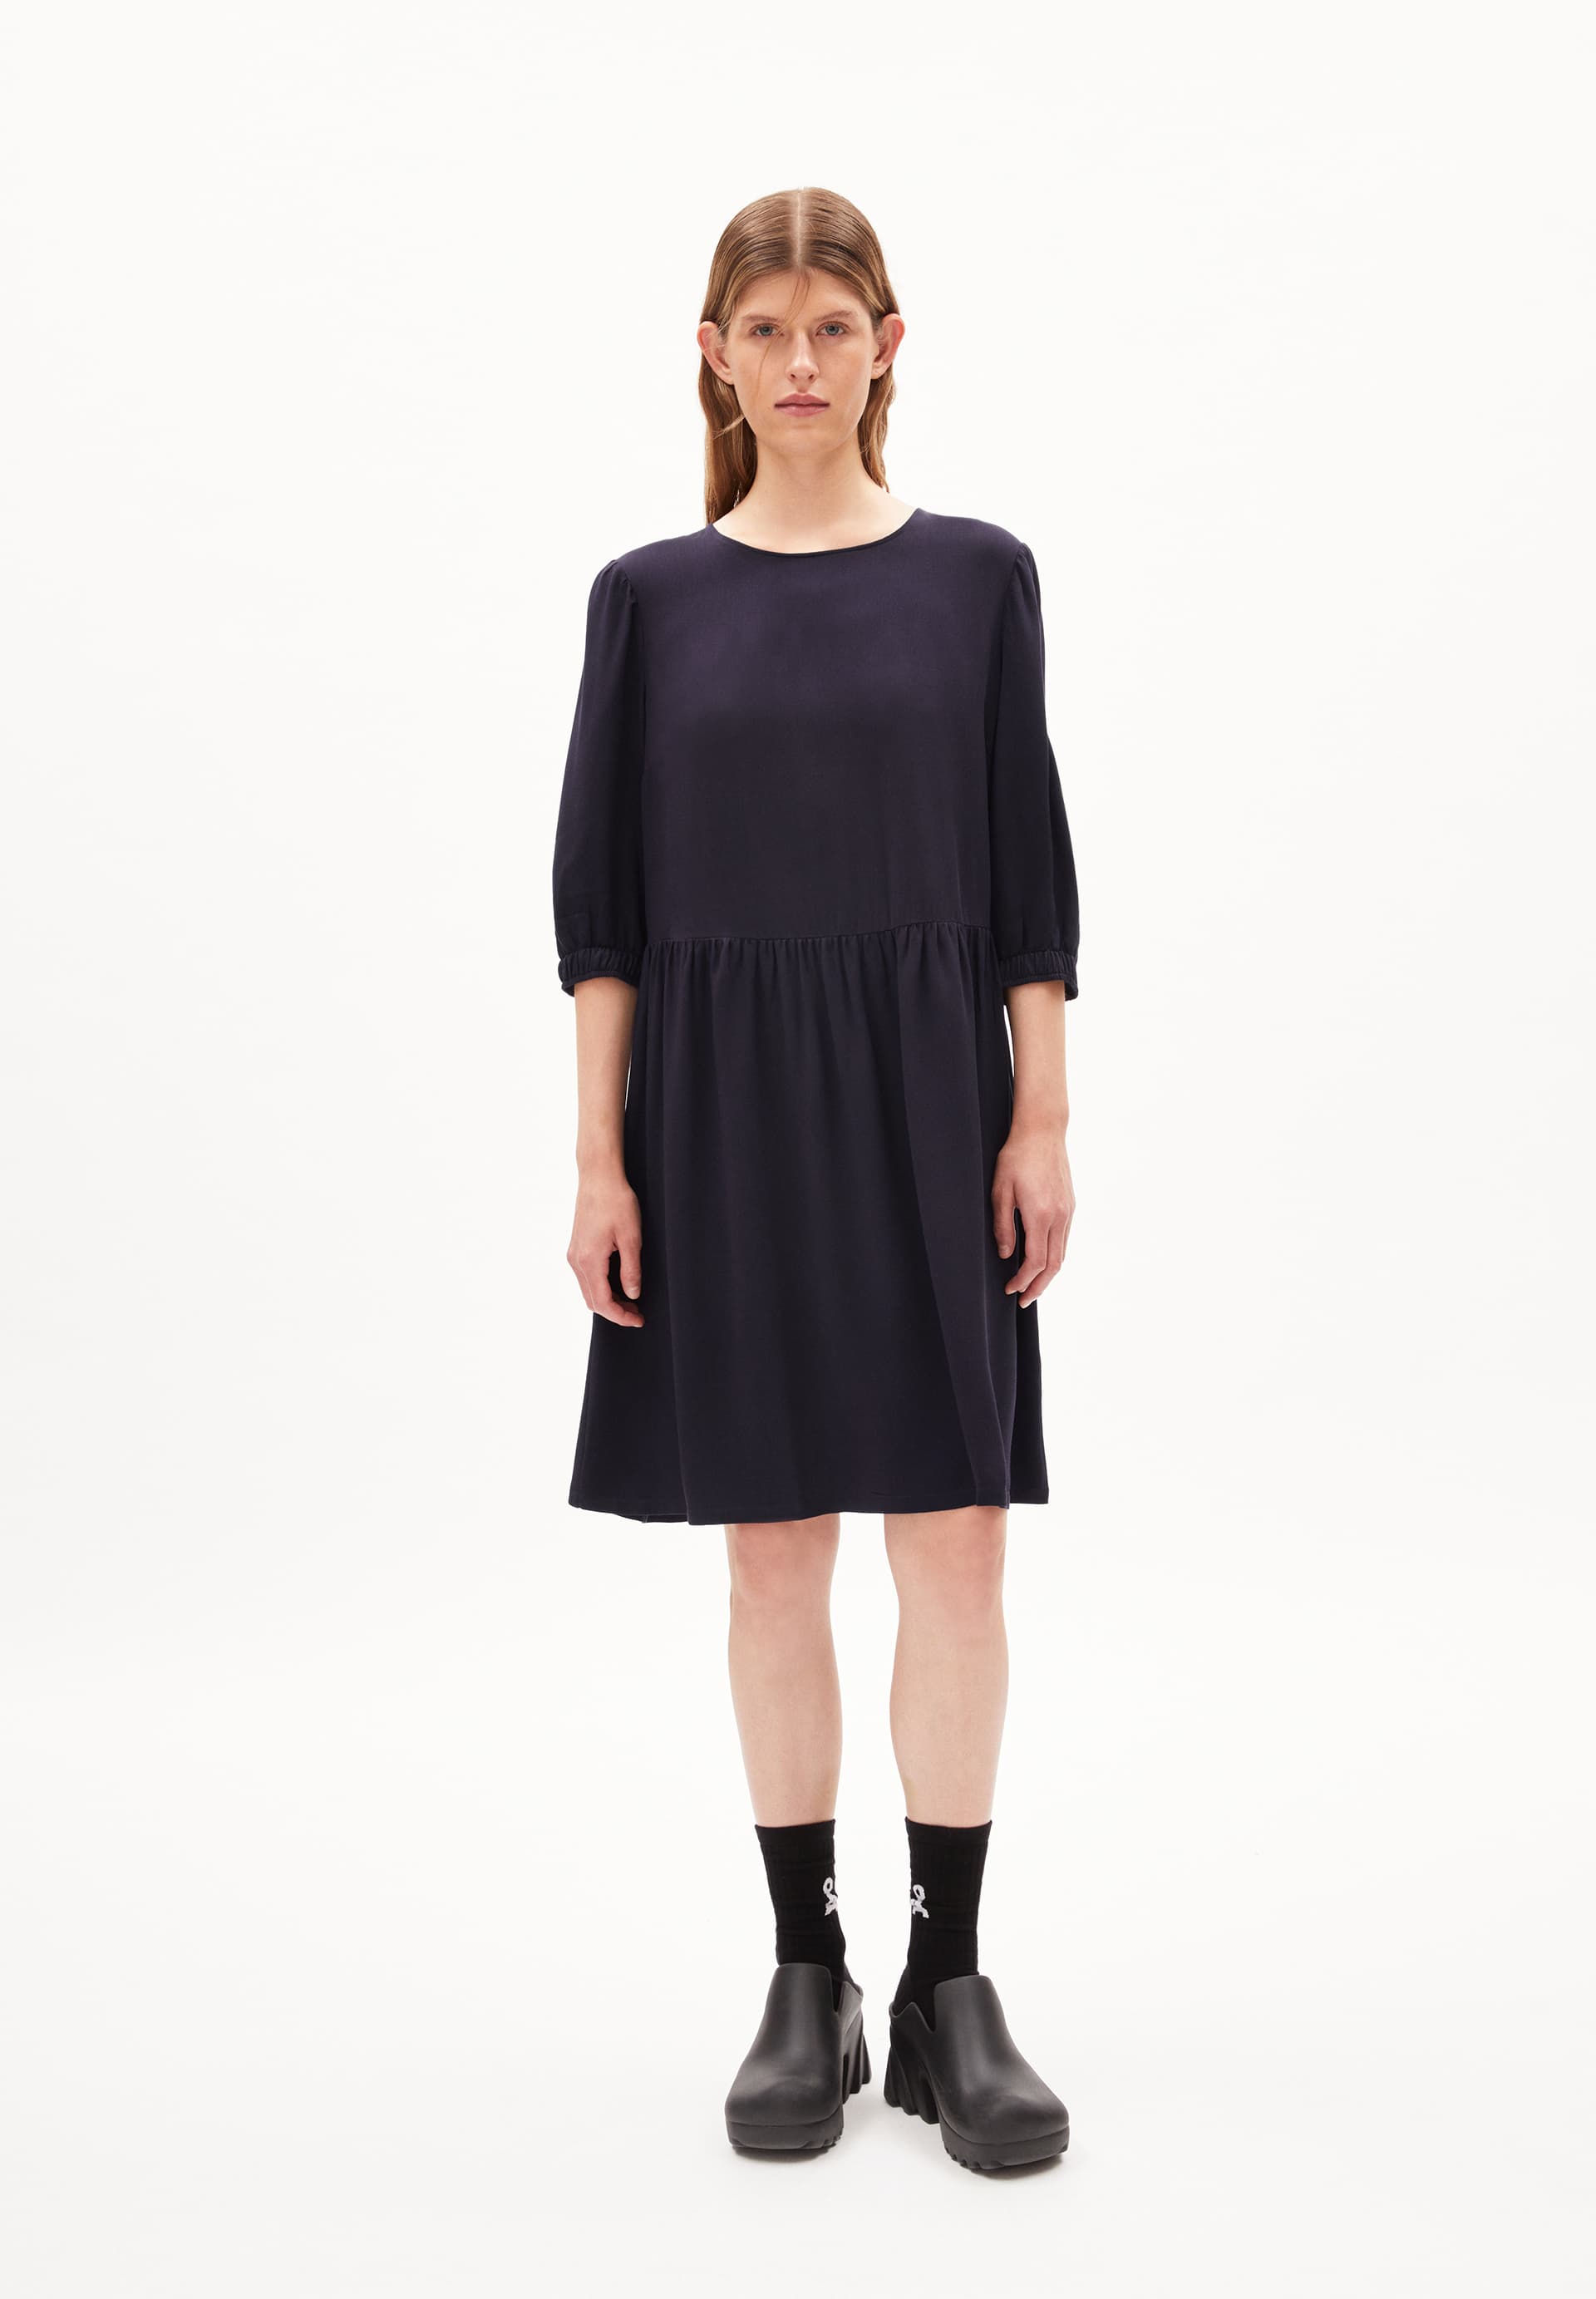 ROSEAA Woven Dress Relaxed Fit made of LENZING™ ECOVERO™ Viscose